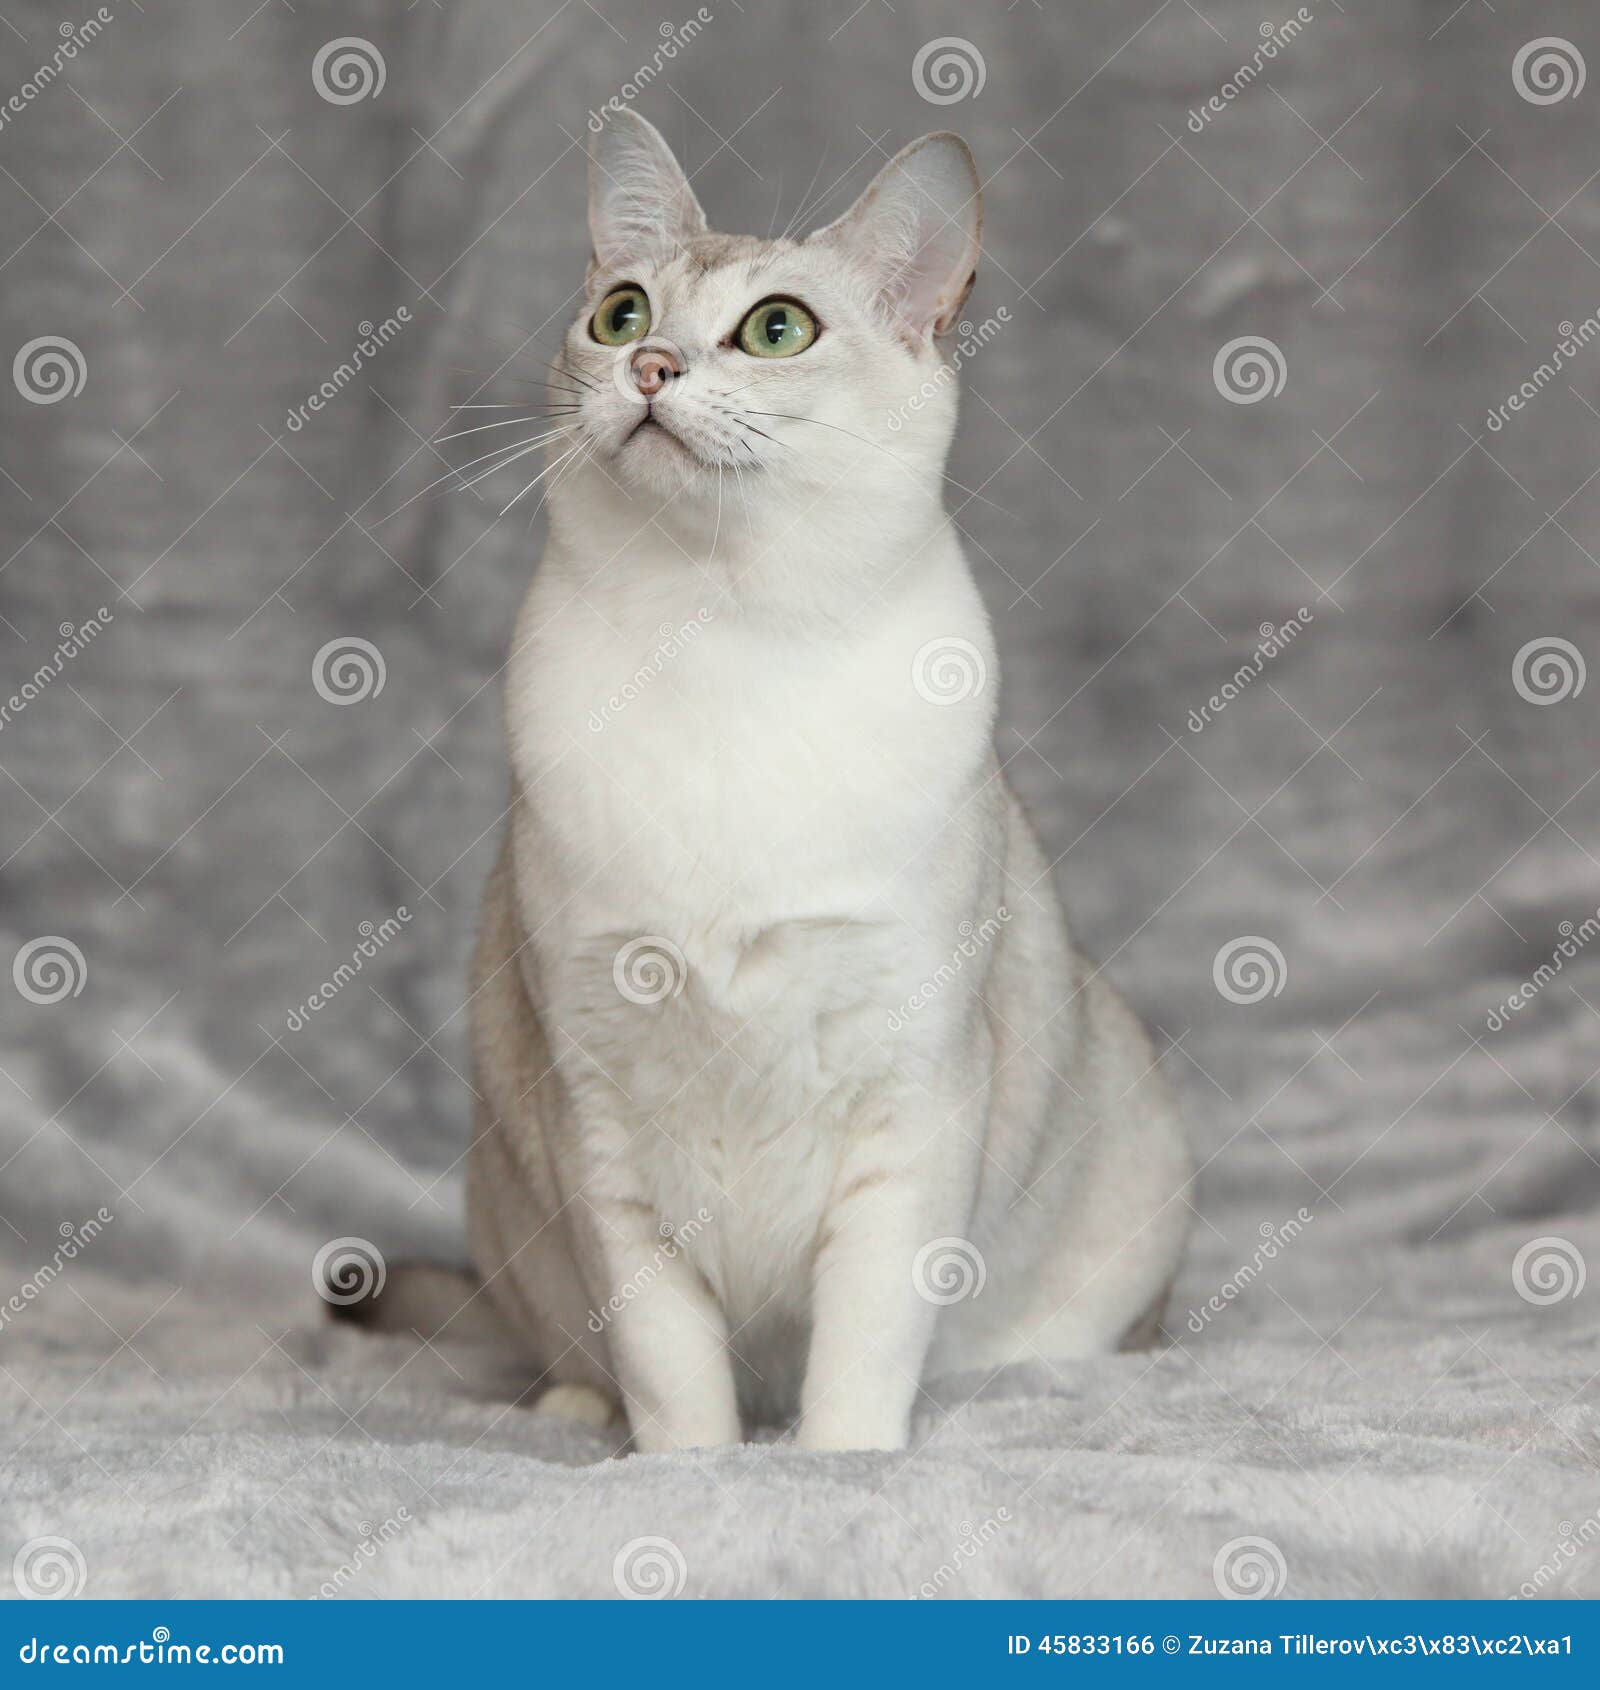 Amazing Burmilla In Front Of Silver Blanket Stock Photo Image Of Curious Kitty 45833166